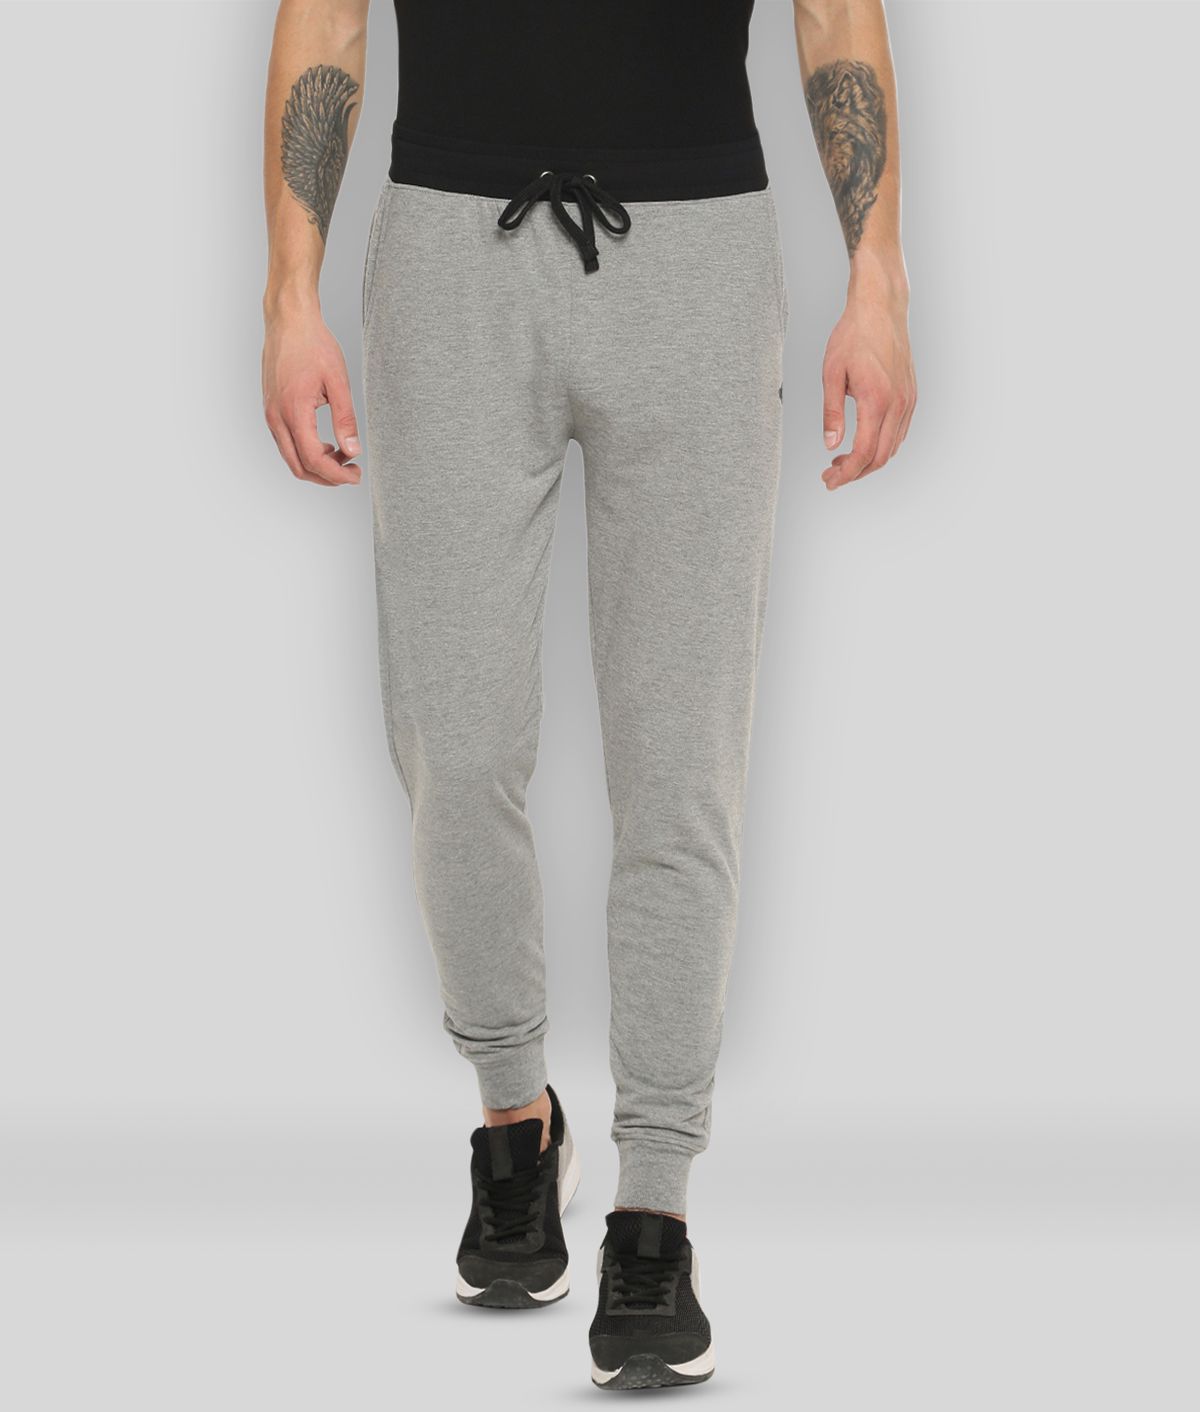     			Dollar - Grey Cotton Men's Joggers ( Pack of 1 )